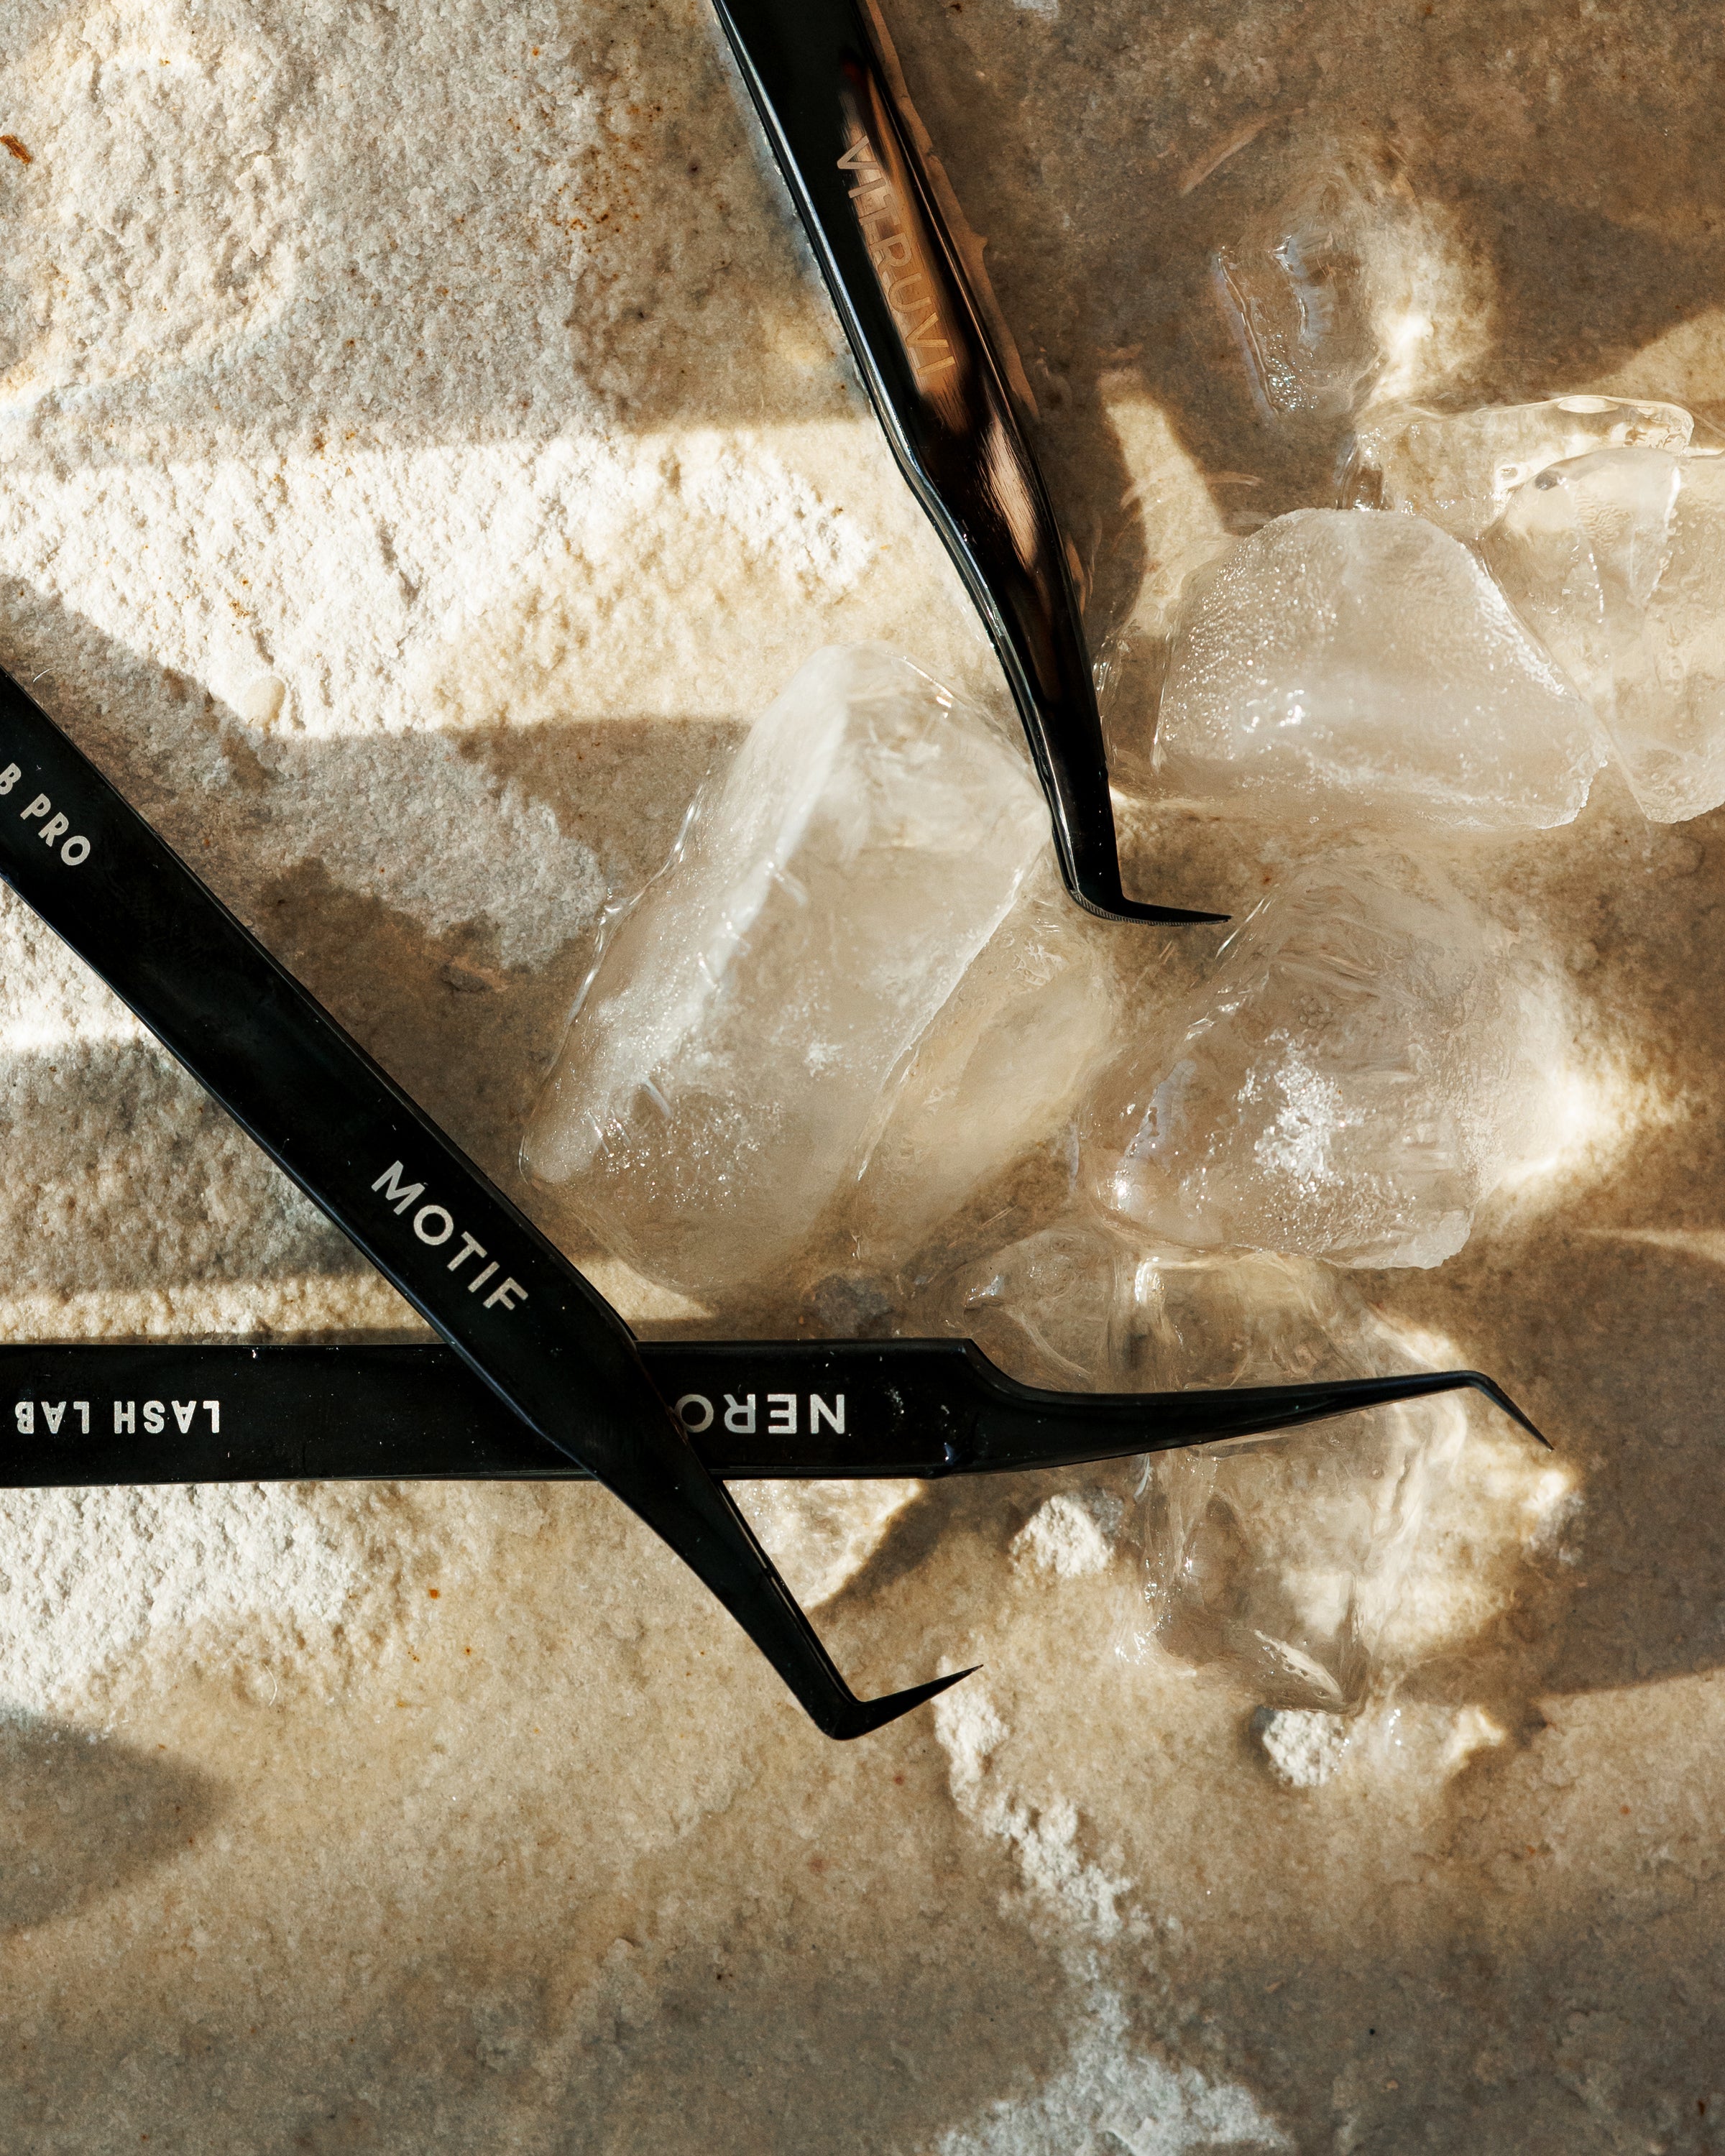 Black eyelash extensions tweezer on a stone surface with ice